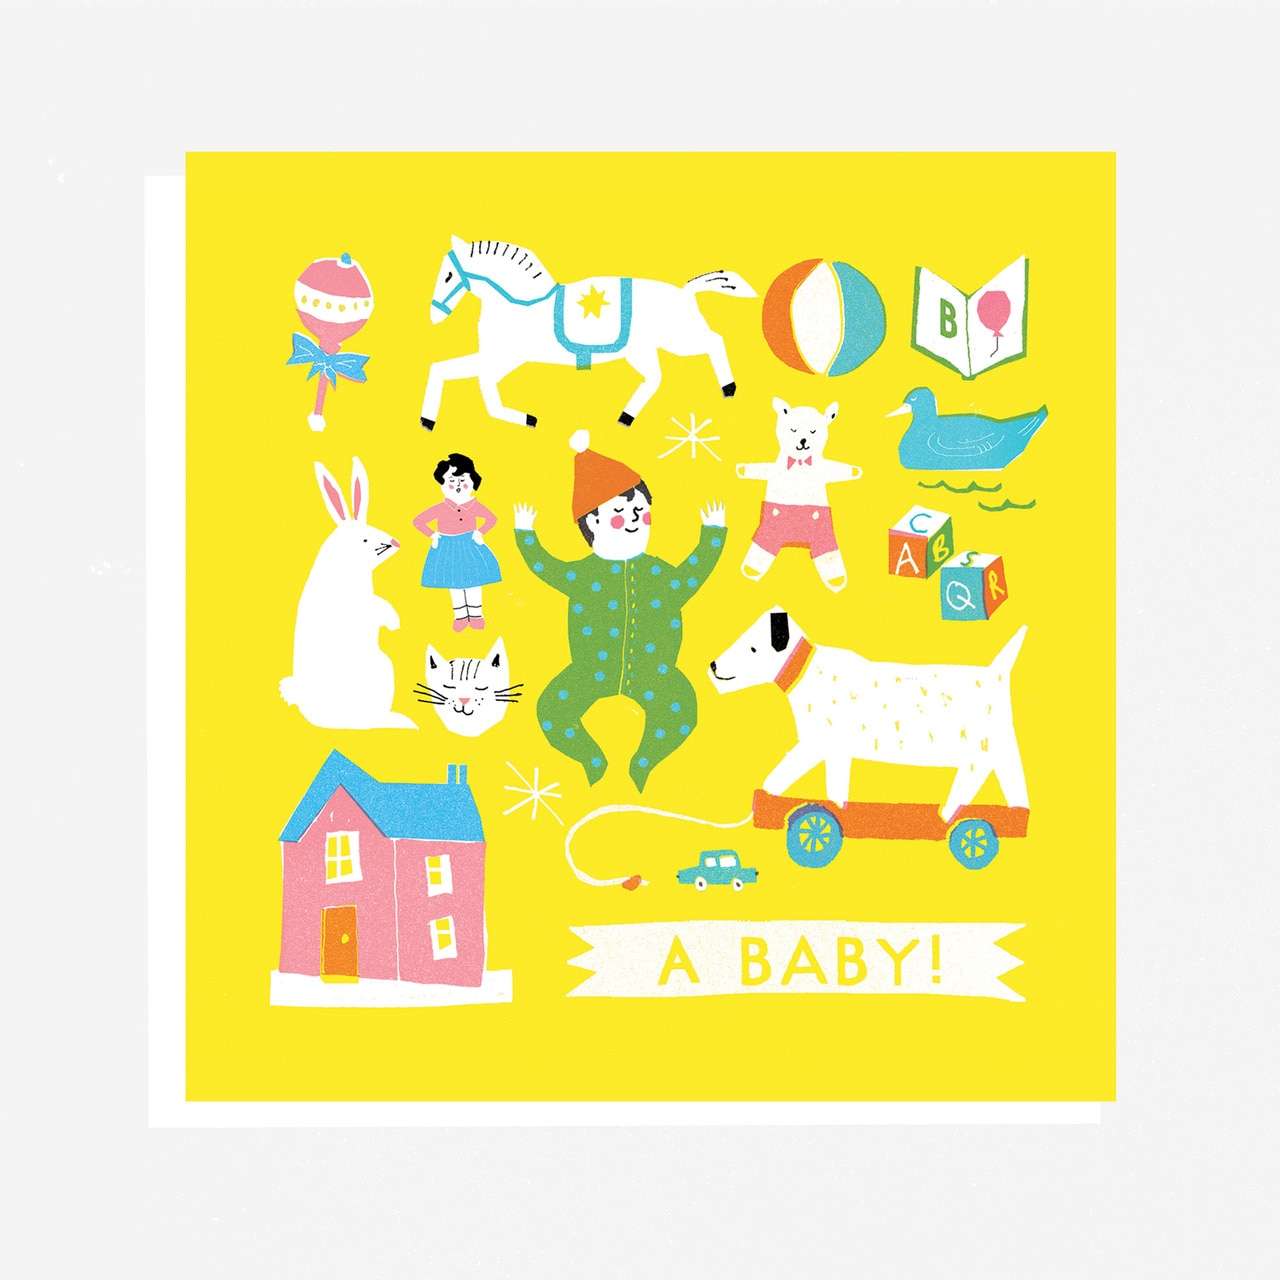 New Baby Greetings Card